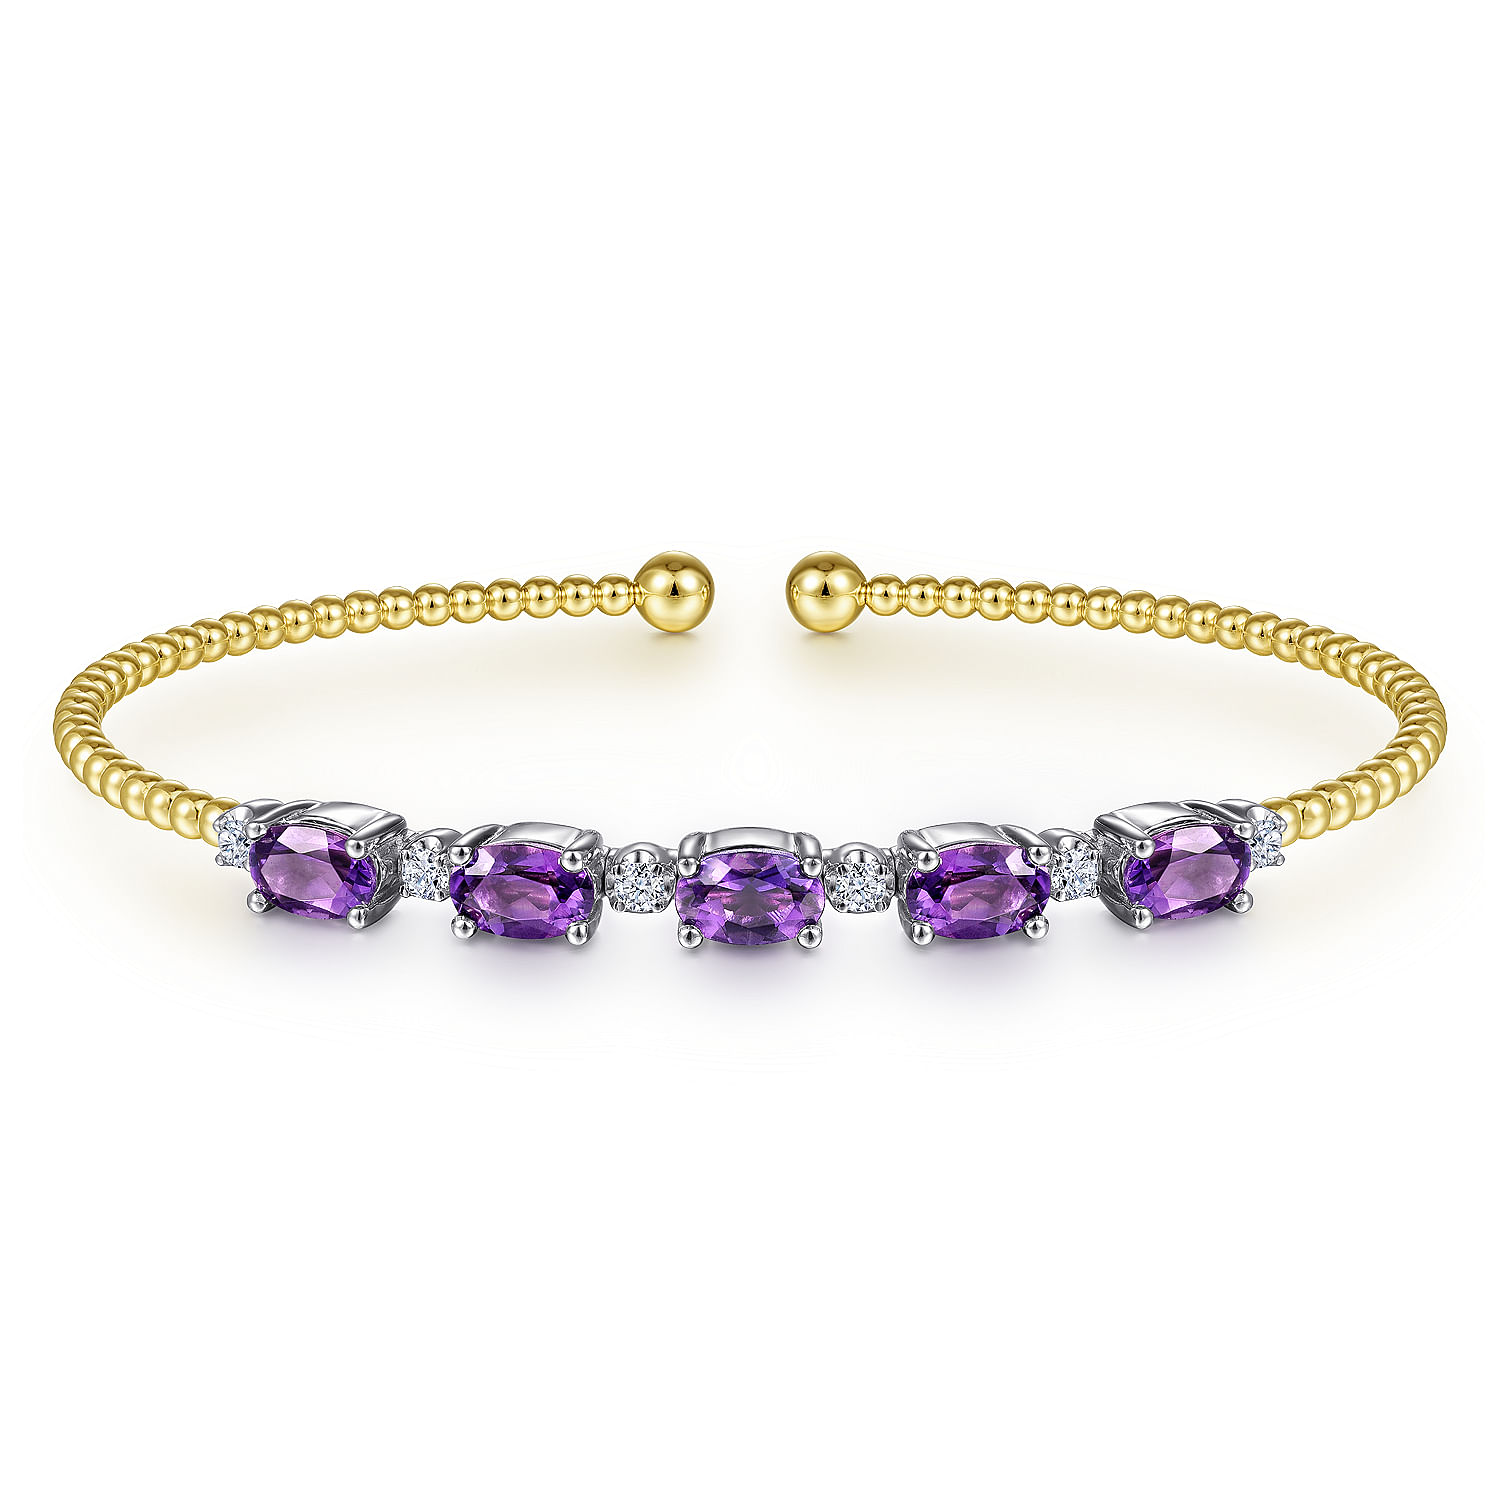 14K White-Yellow Gold Bujukan Bead Cuff Bracelet with Amethyst and Diamond Stations